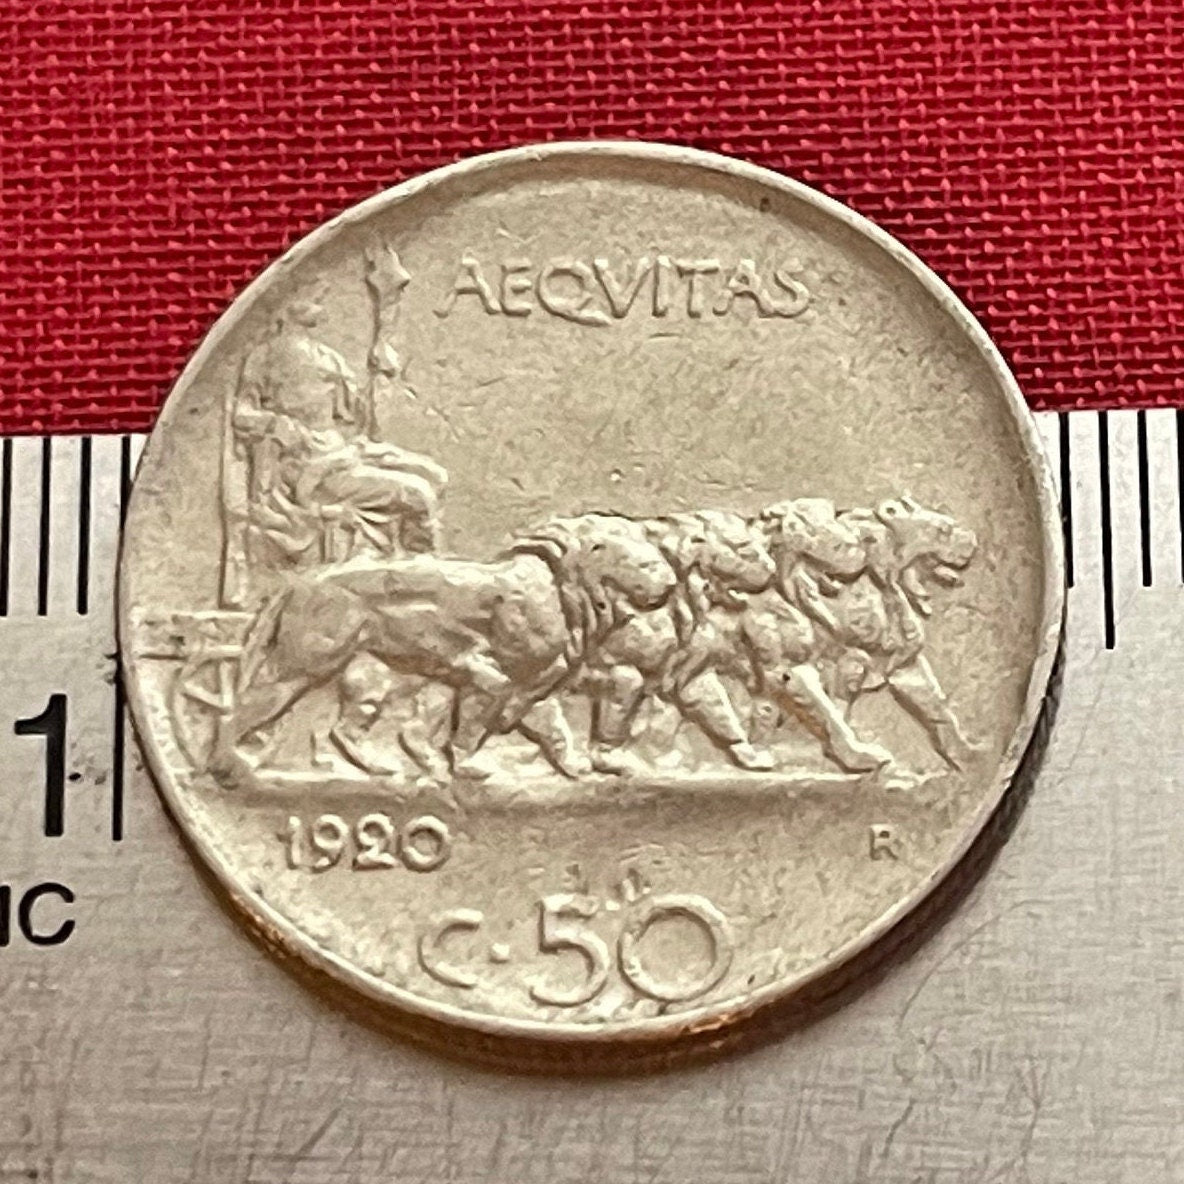 Goddess Aequitas in 4-Lion Chariot 50 Centesimi Italy Authentic Coin Money for Jewelry (King Vittorio Emanuele III) (Goddess of Equity)